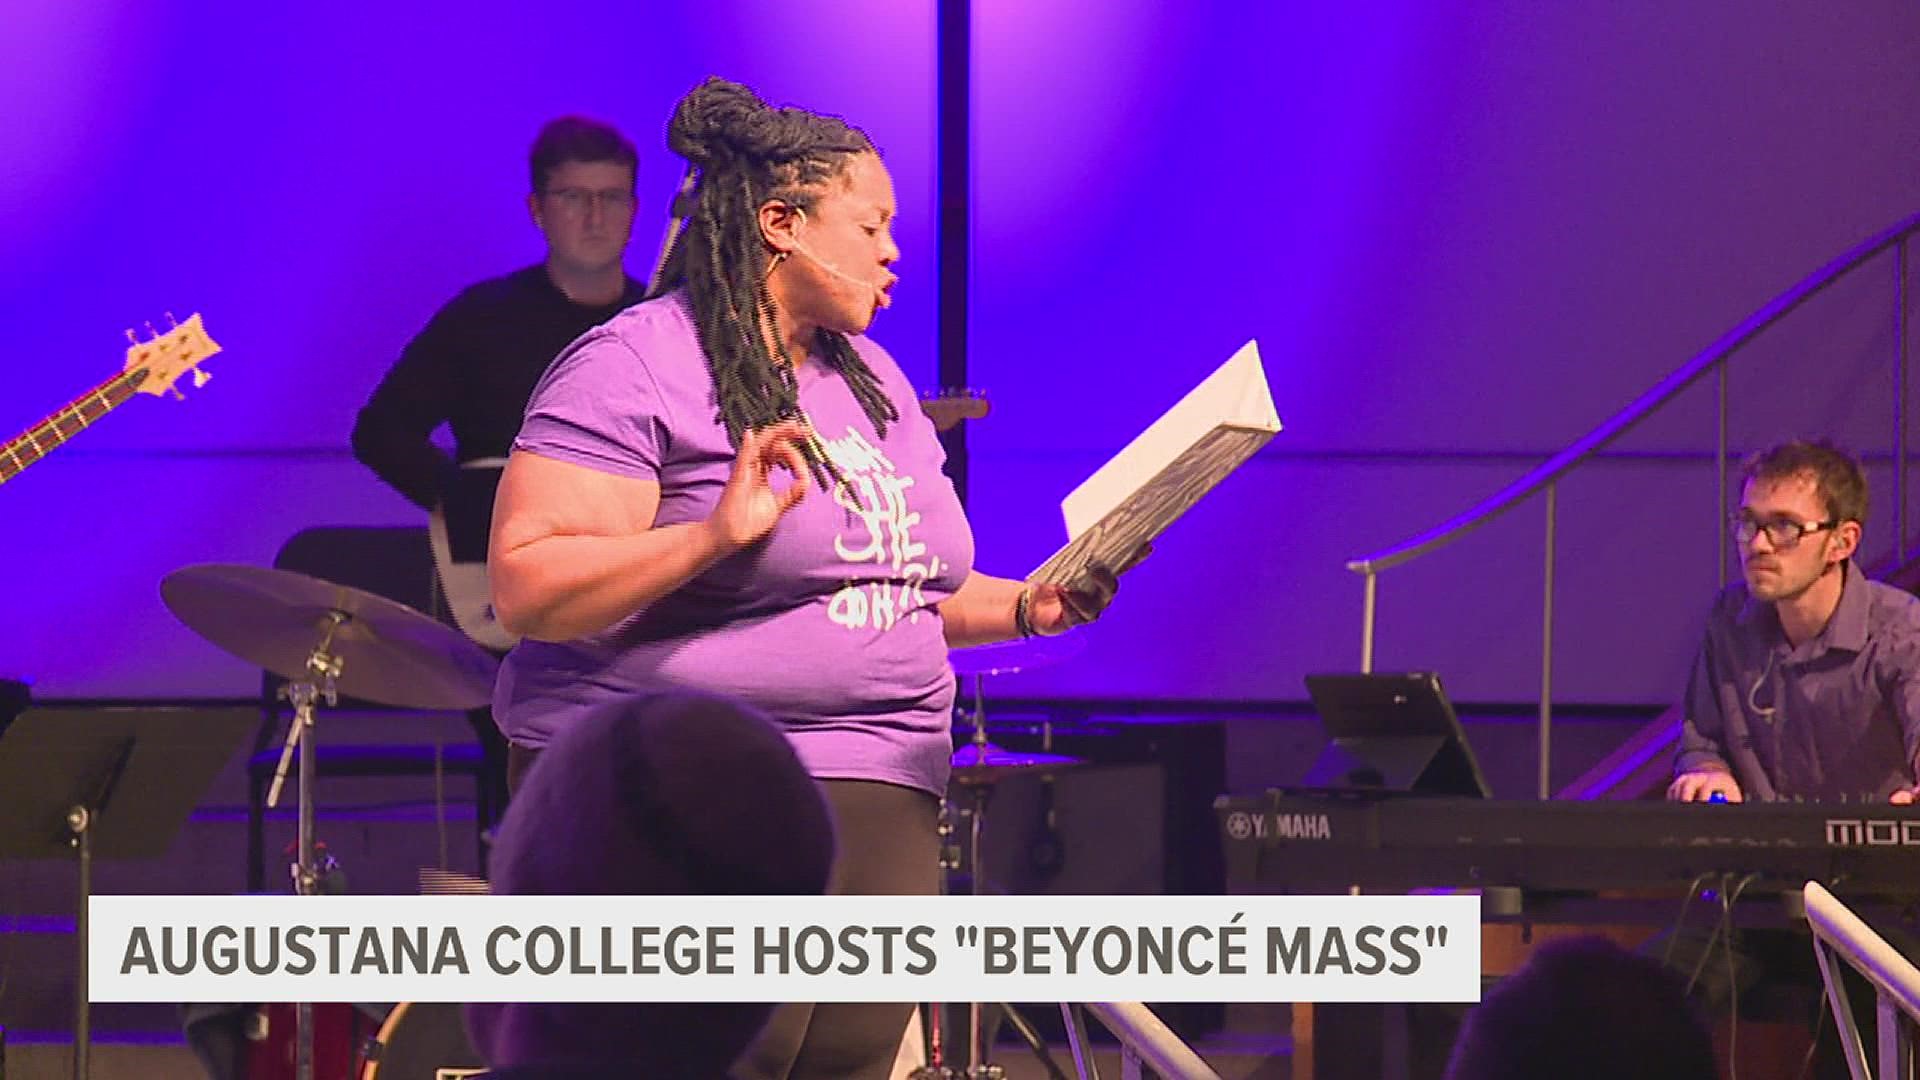 Augustana College hosts "Beyoncé Mass" service to encourage diversity, inclusion.